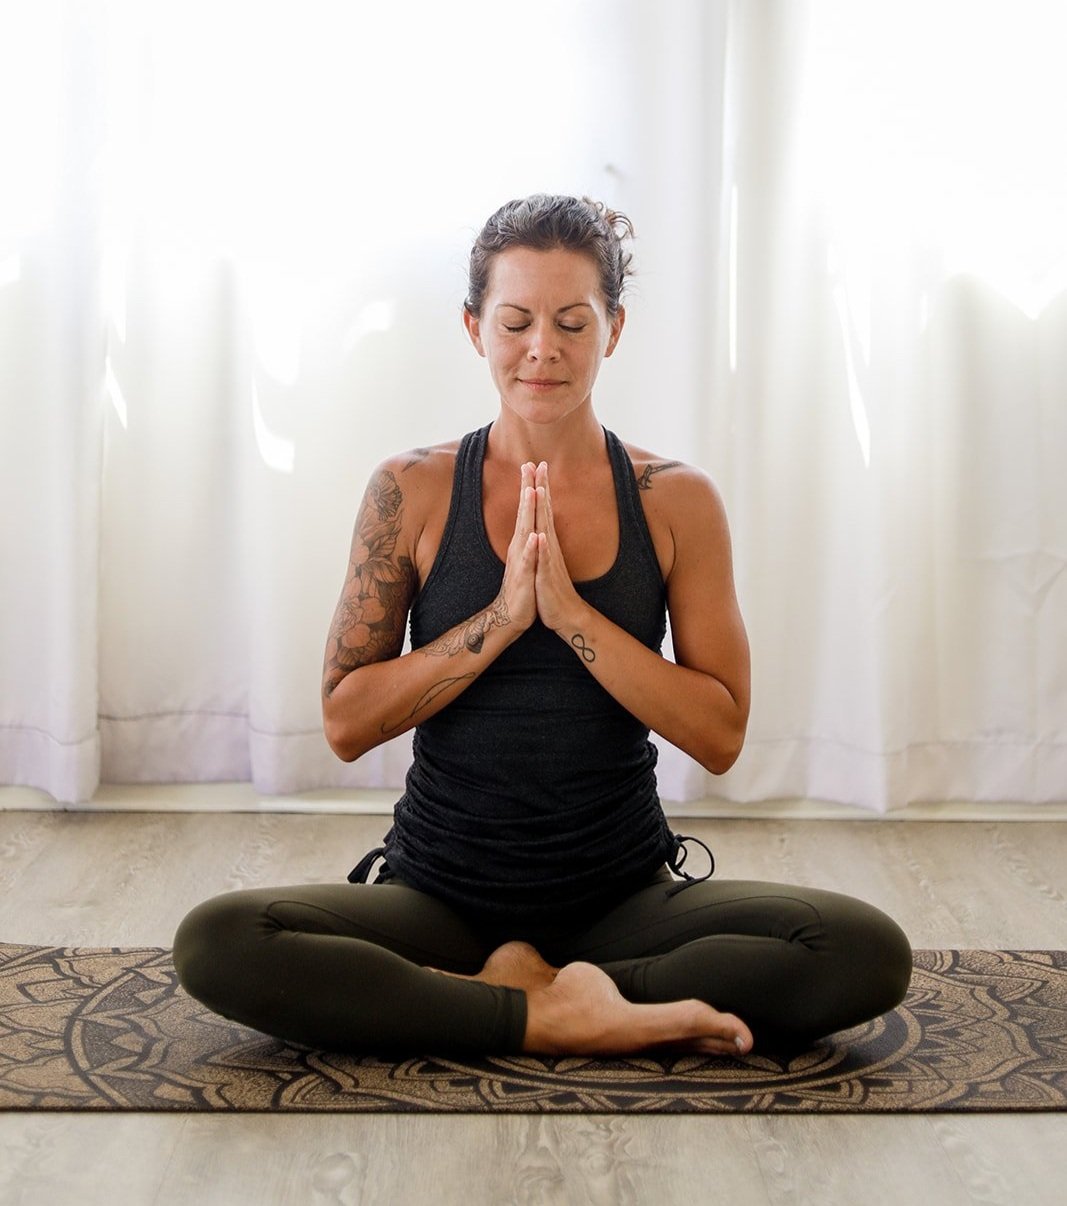 8 tips on how to do yoga at home - Practice and all is coming